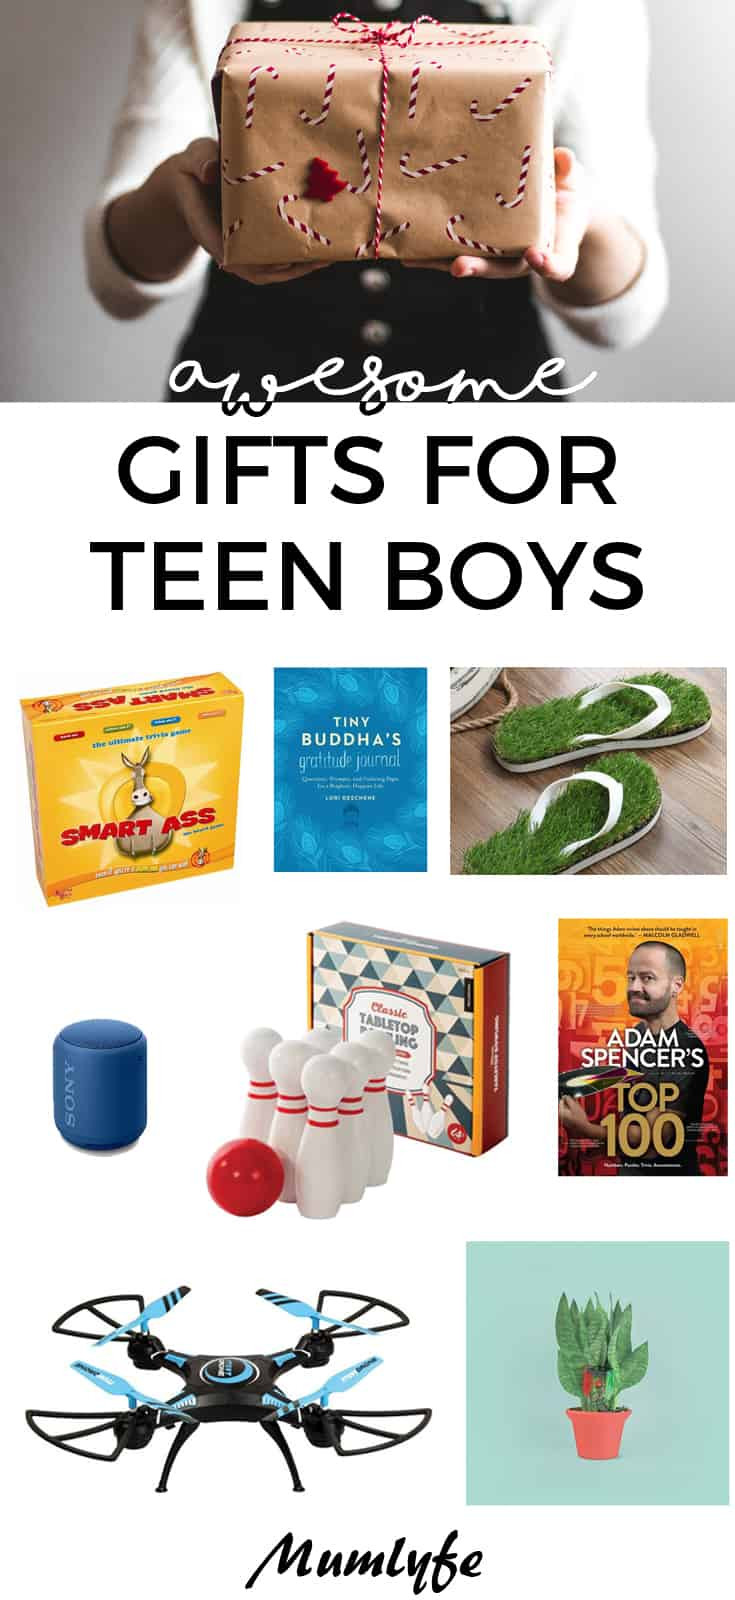 Gift Ideas For Boys
 Awesome t ideas for teen boys they will love anything